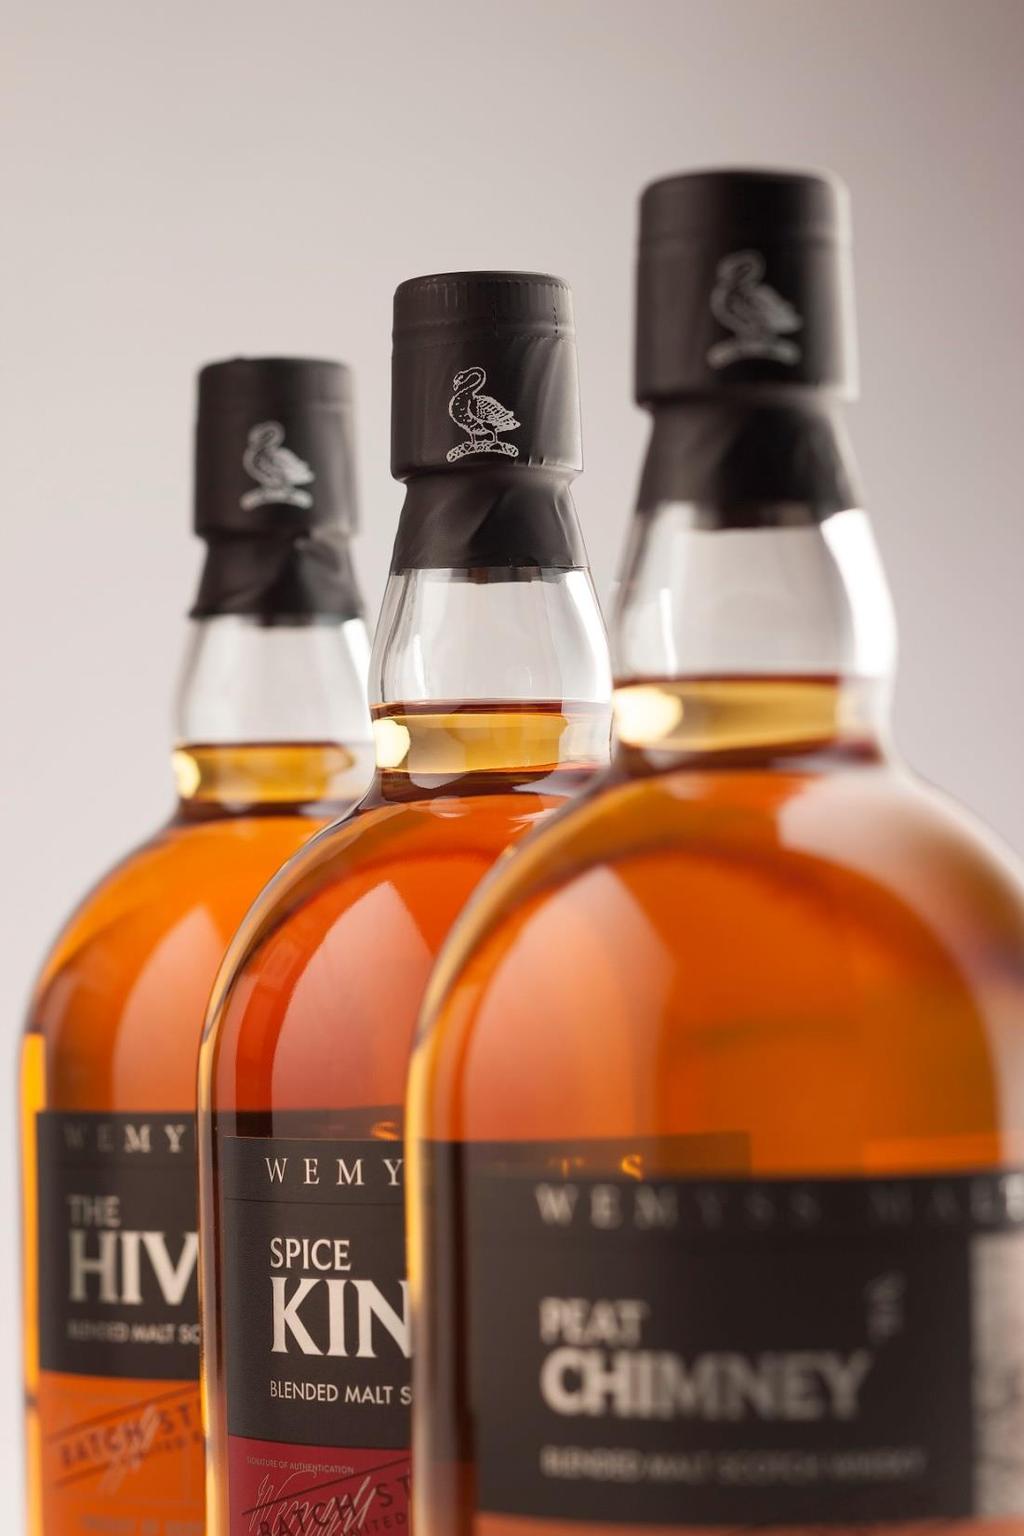 Each of the blended Scottish malt is named from the flavours and aromas that can be found in the whisky.